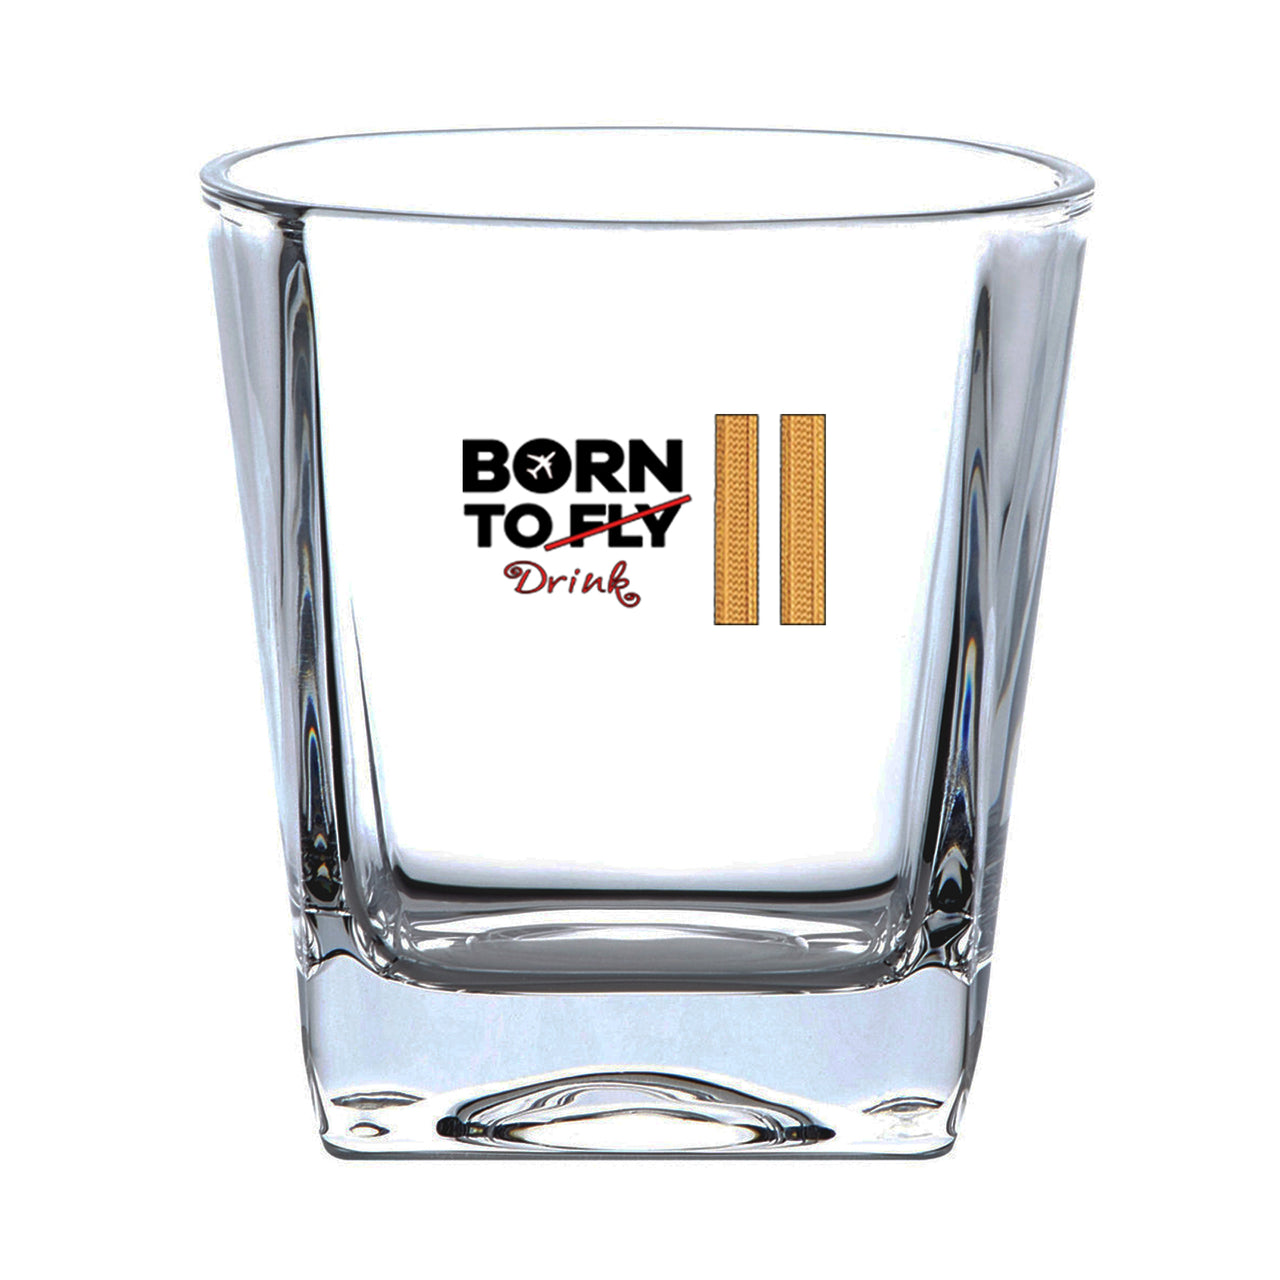 Born To Drink & 2 Lines Designed Whiskey Glass